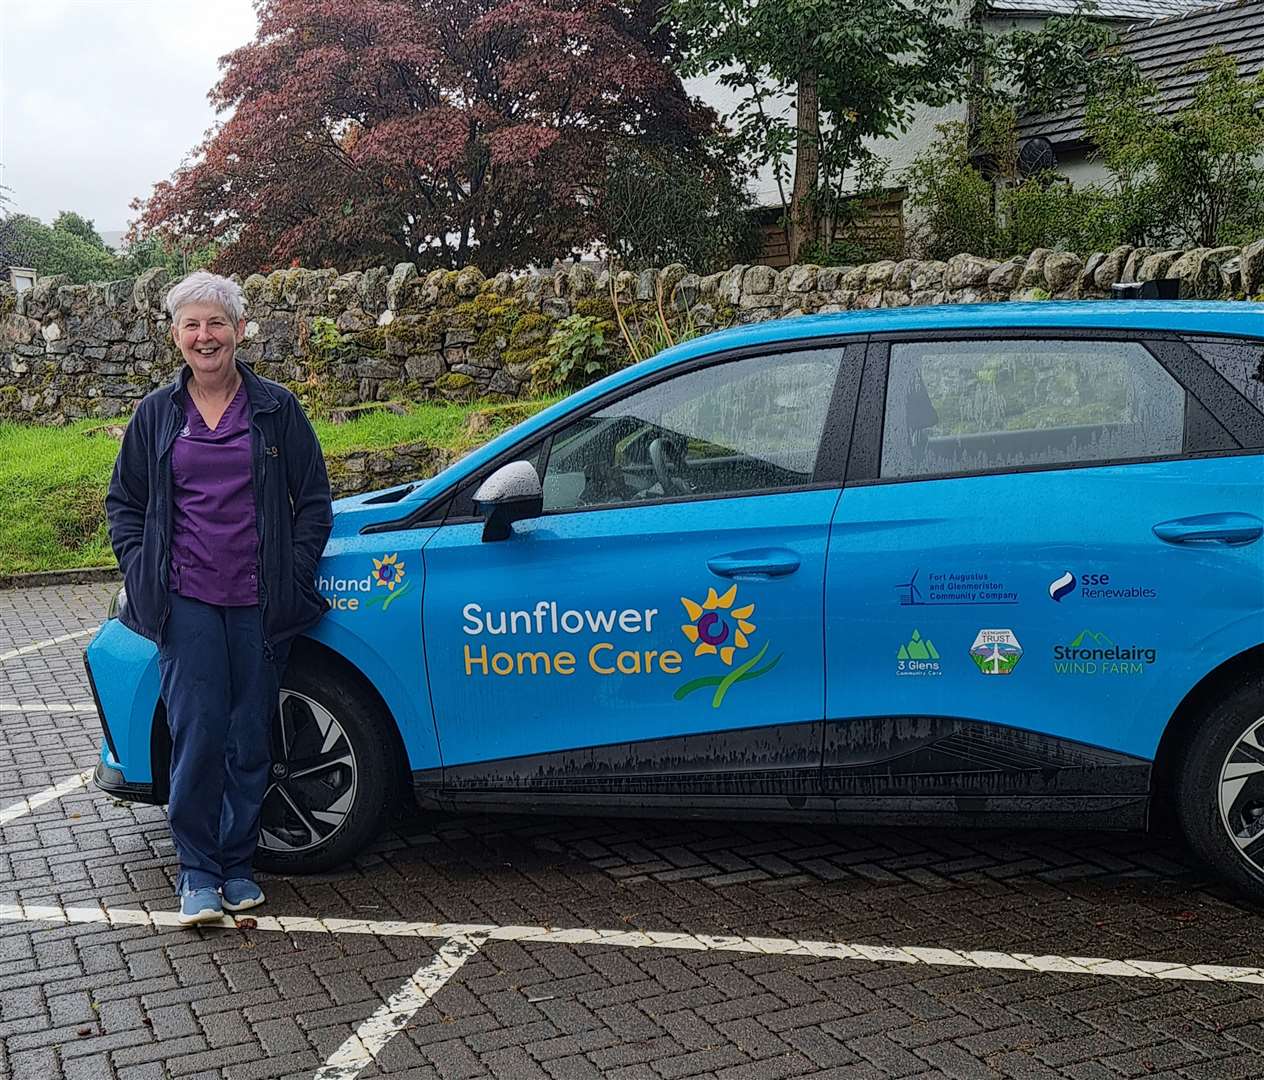 A 3 Glens home carer with one of the electric vehicles they now have access to.